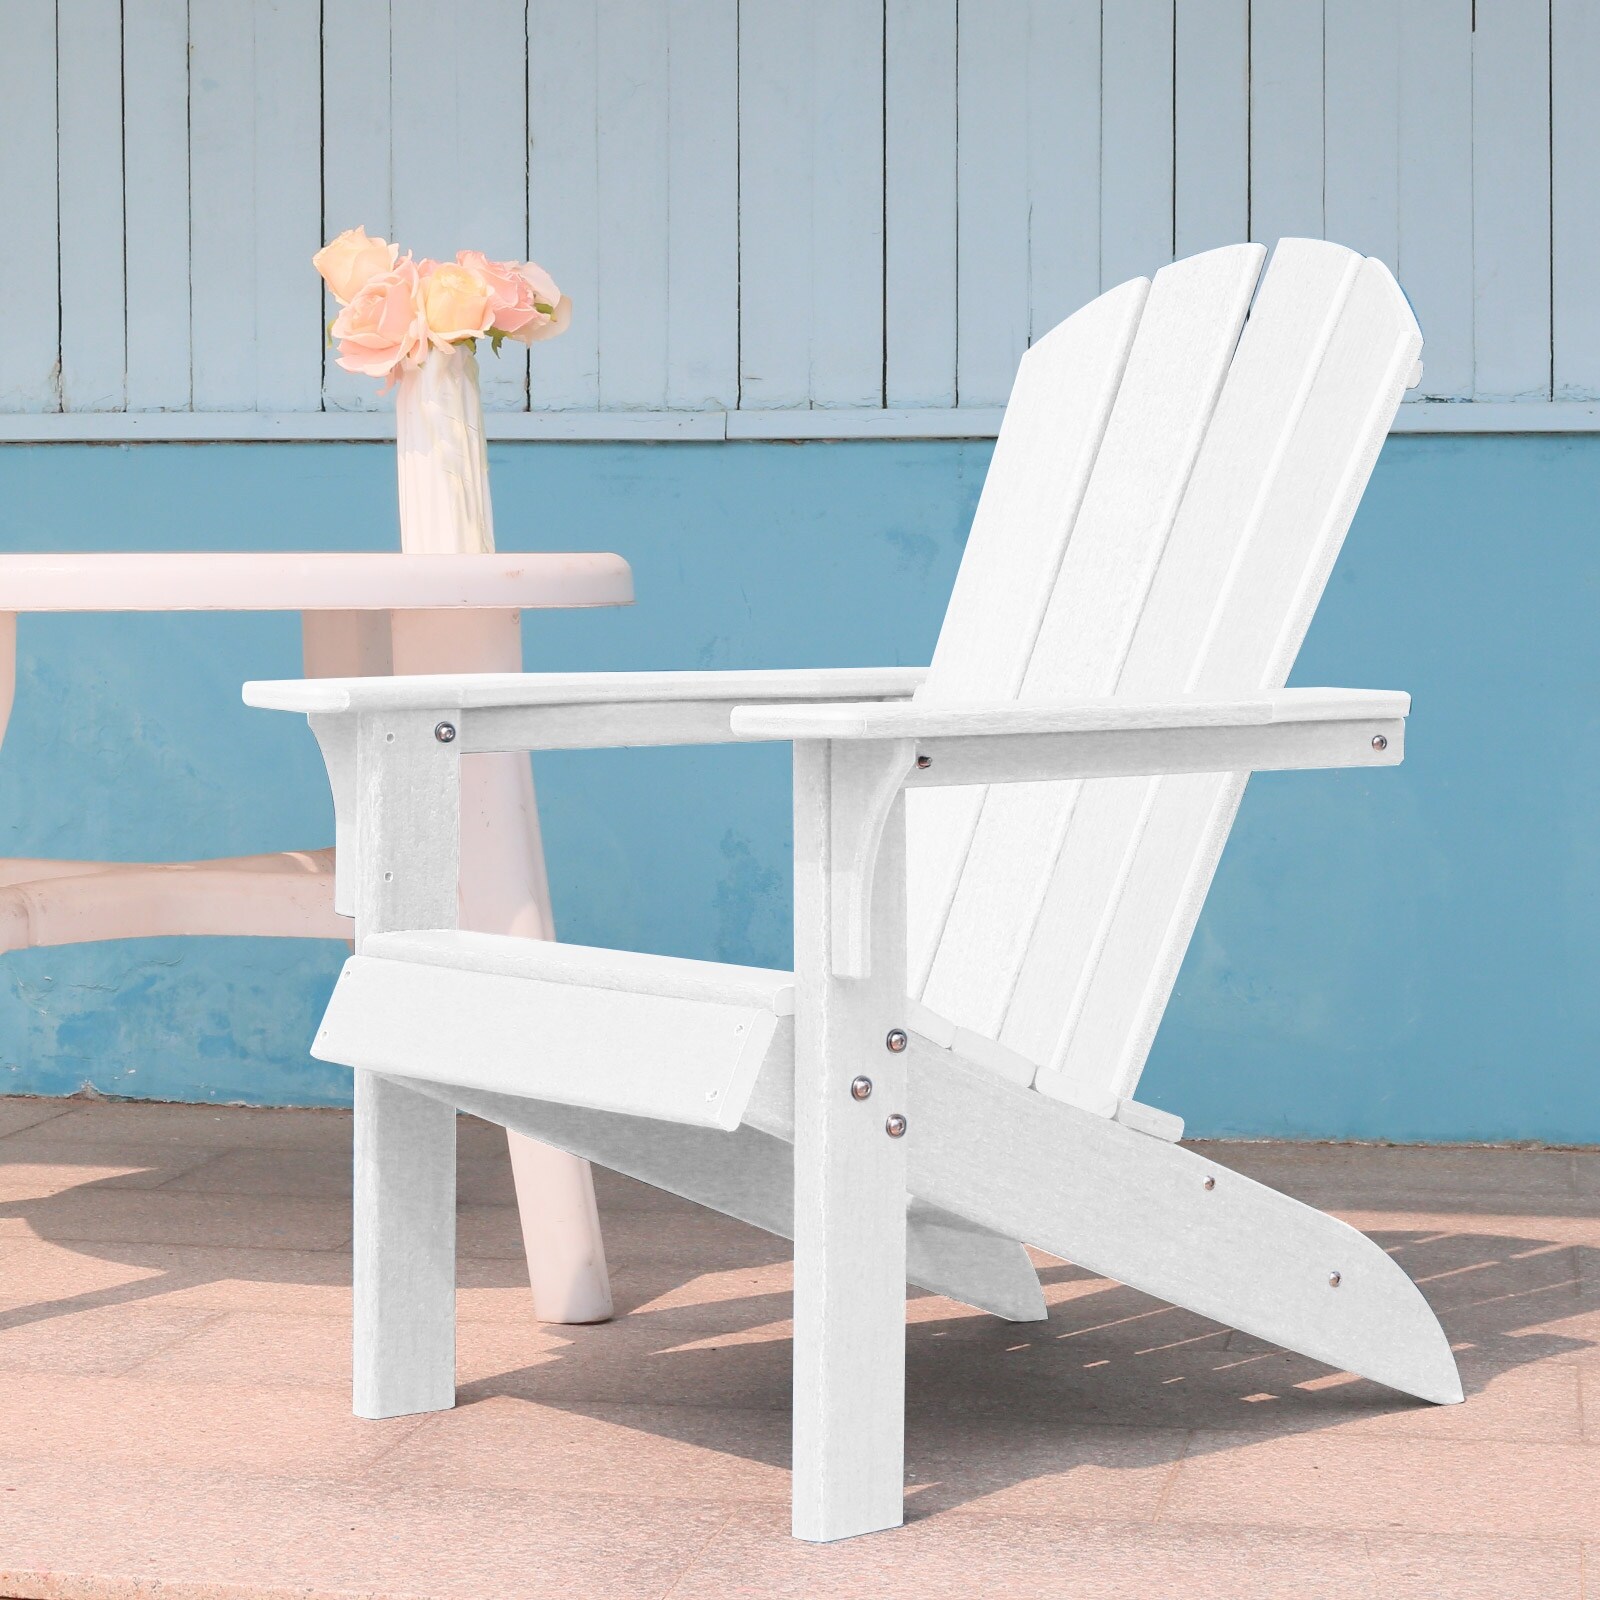 Nestfair Weather Resistant Outdoor Chairs Adirondack Chair Patio Chairs